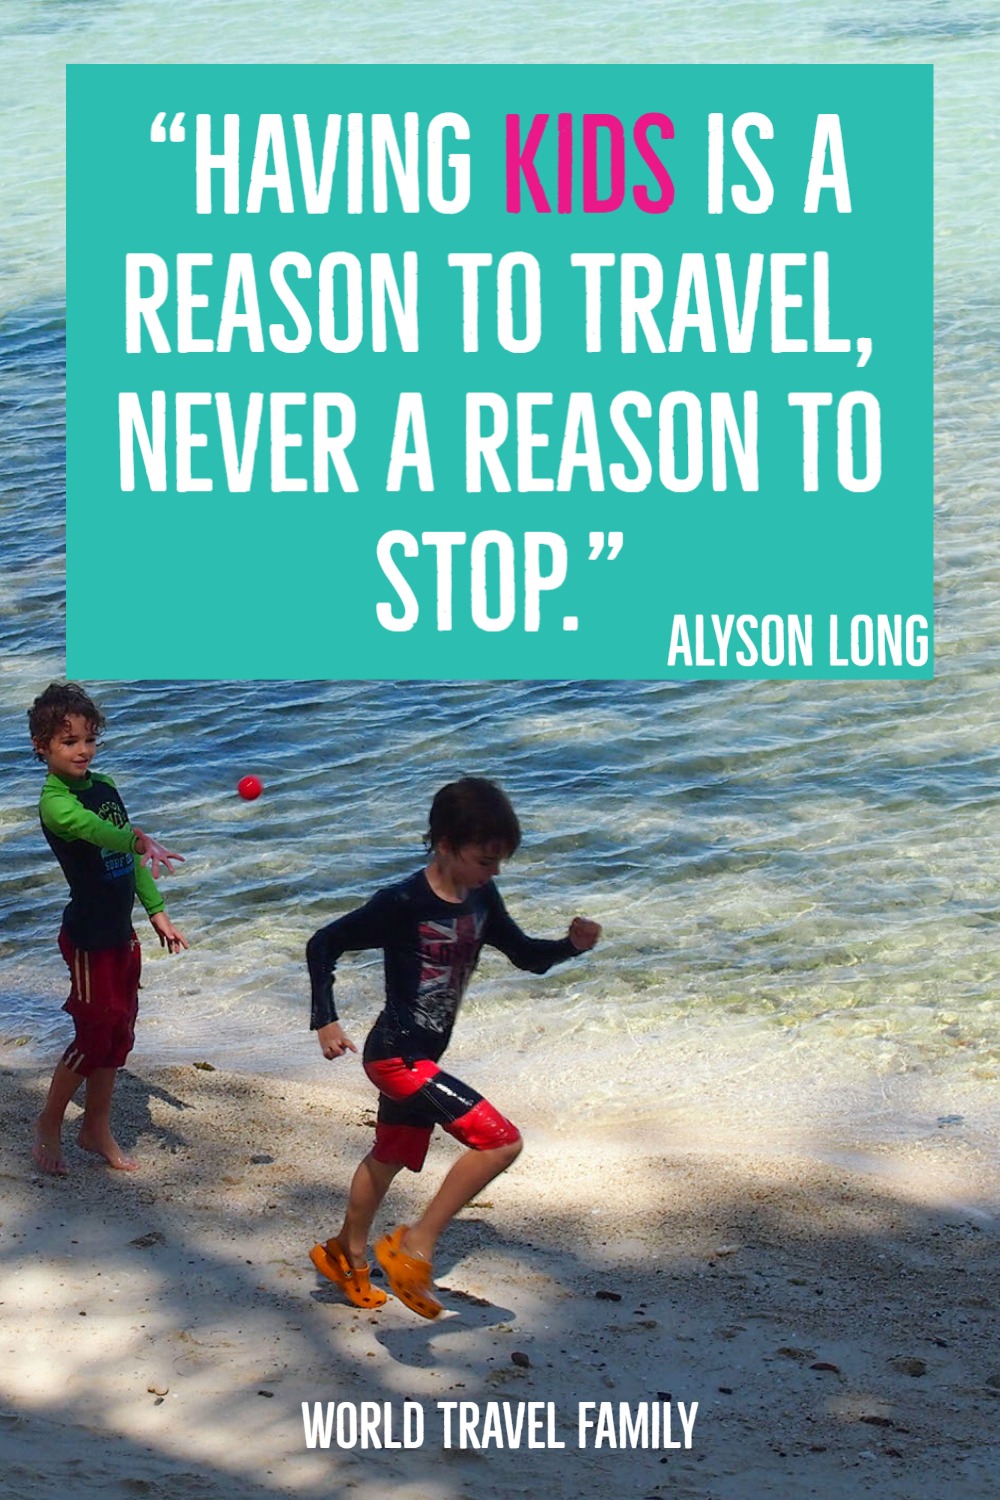 why travel why people travel reasons to travel travel quote why travel with kids